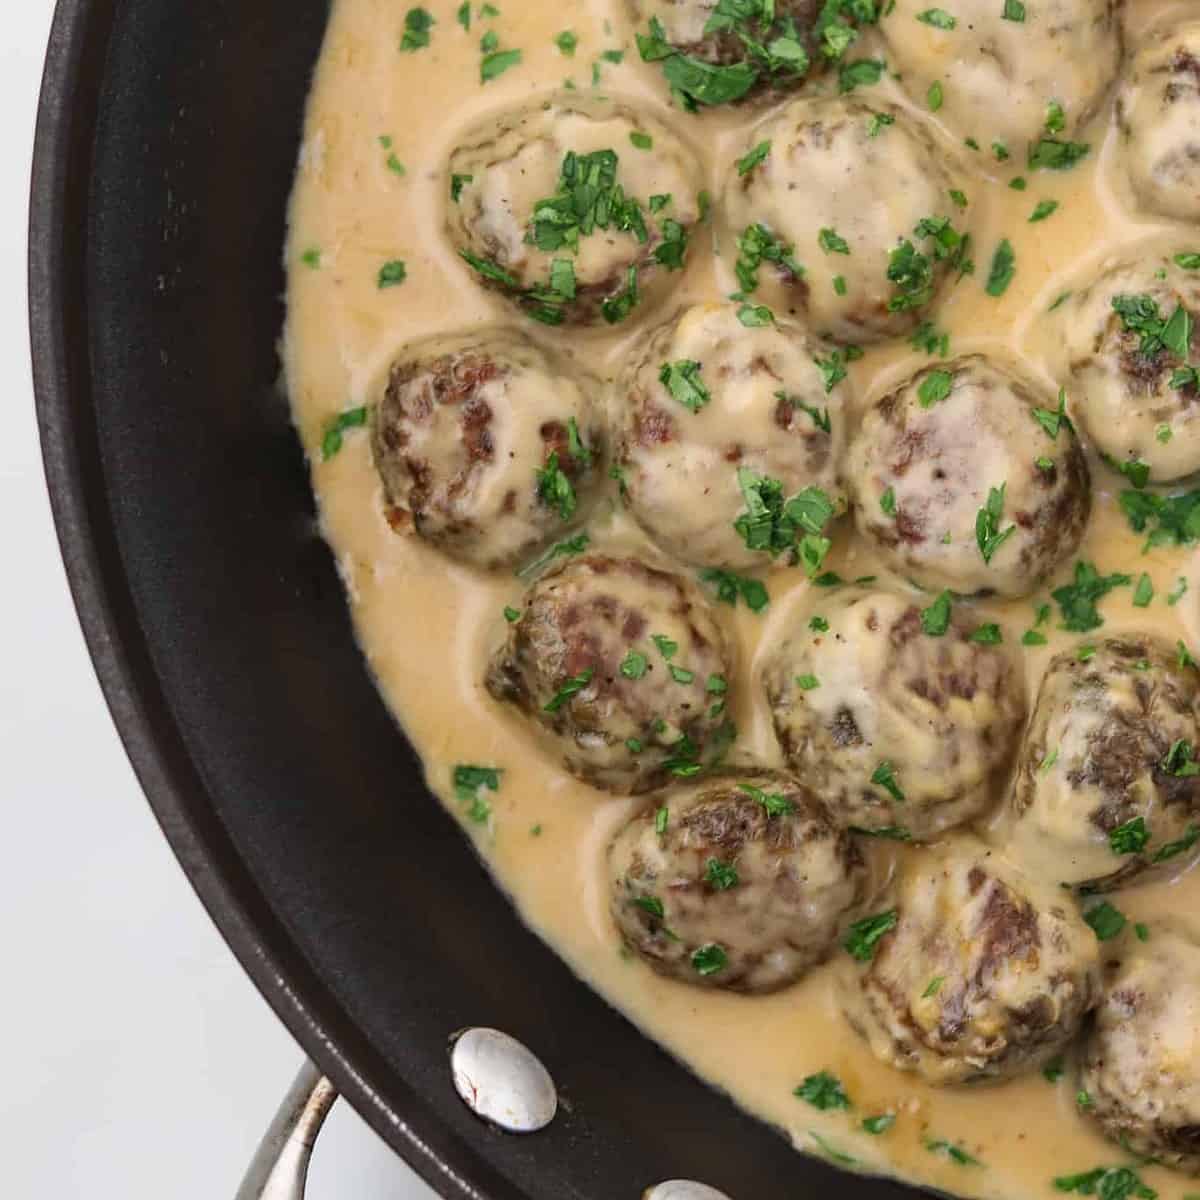  These meatballs are so good, you won't even miss the meat!